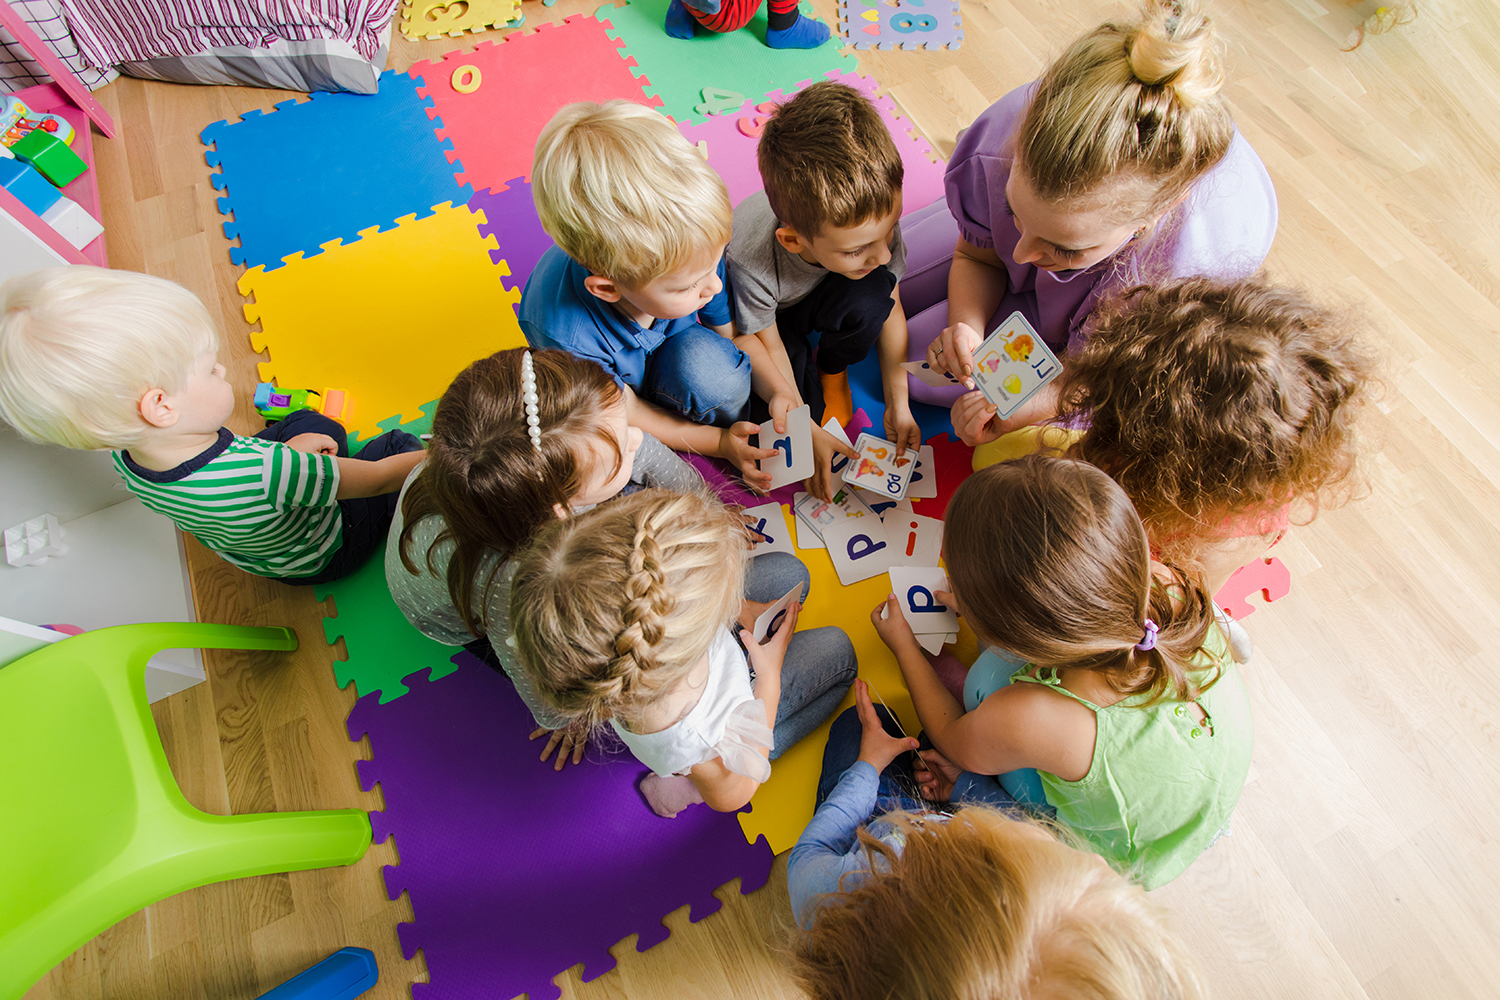 What to Consider When Choosing a Daycare Provider